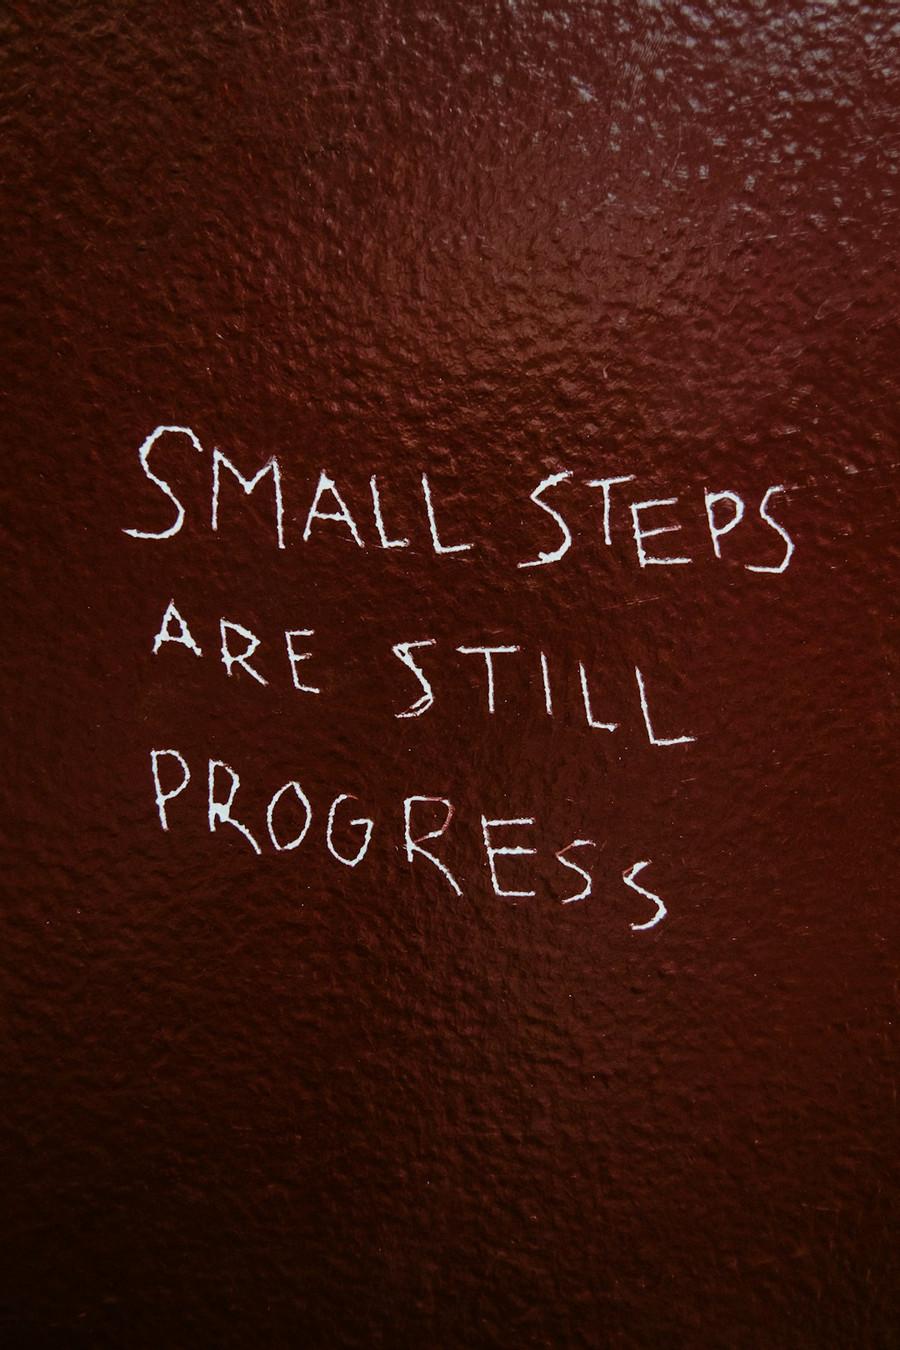 EVERY BIG JOURNEY BEGINS WITH A SMALL STEP.